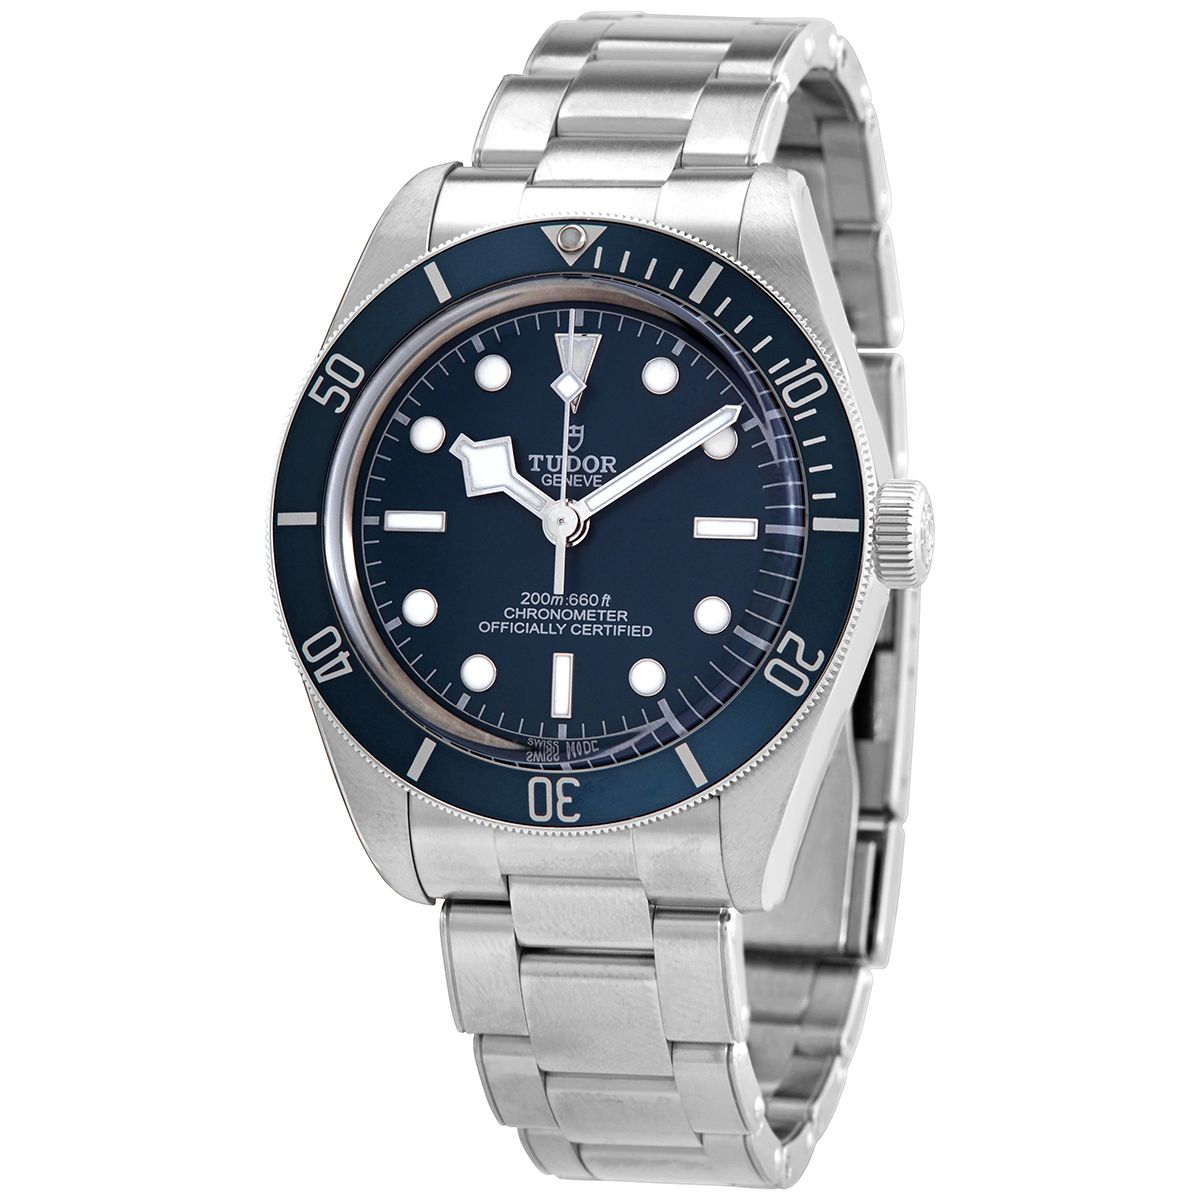 Leading 5 Tudor Watches You Can Use Everyday